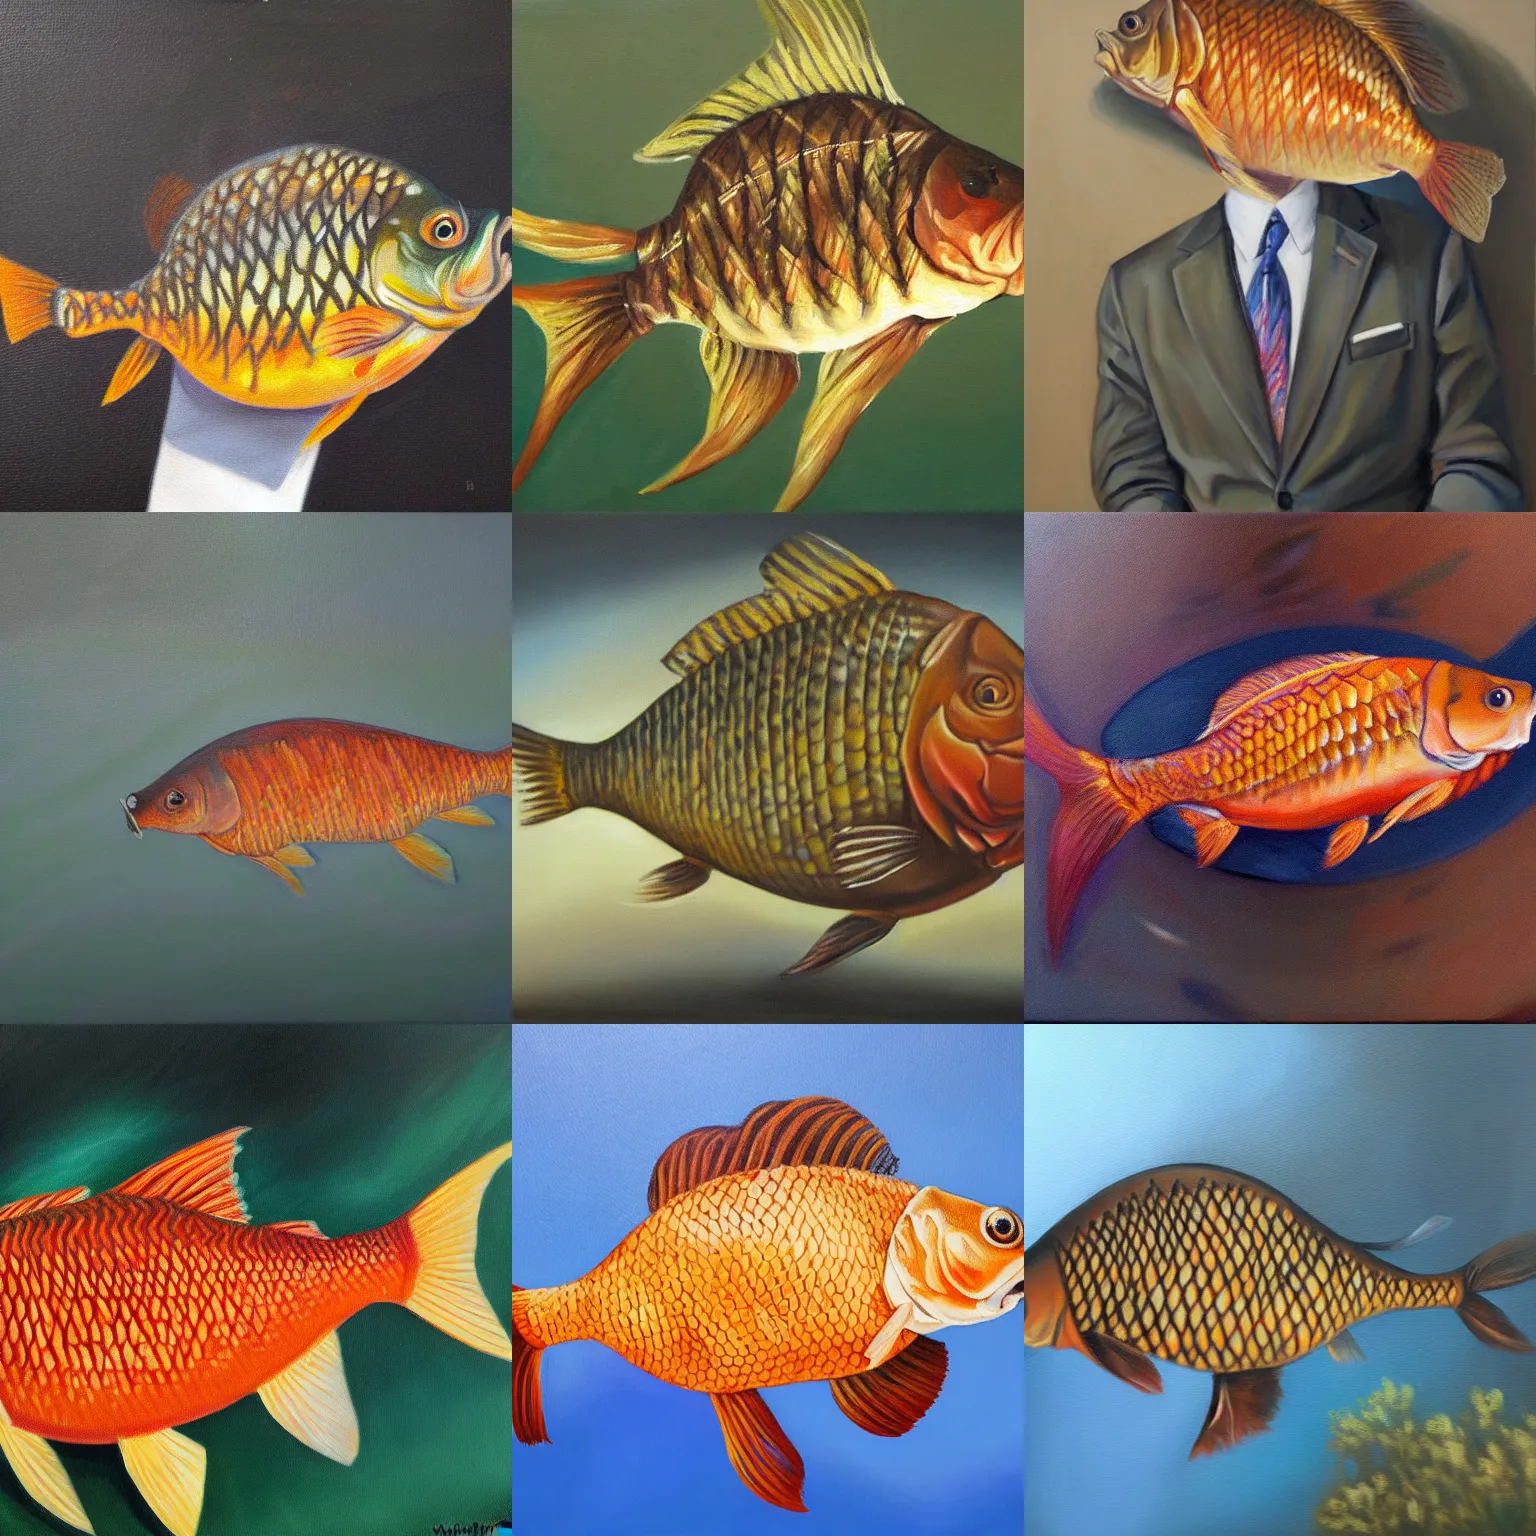 Prompt: a photorealistic oil painting portrait of a carp fish wearing a suit and tie